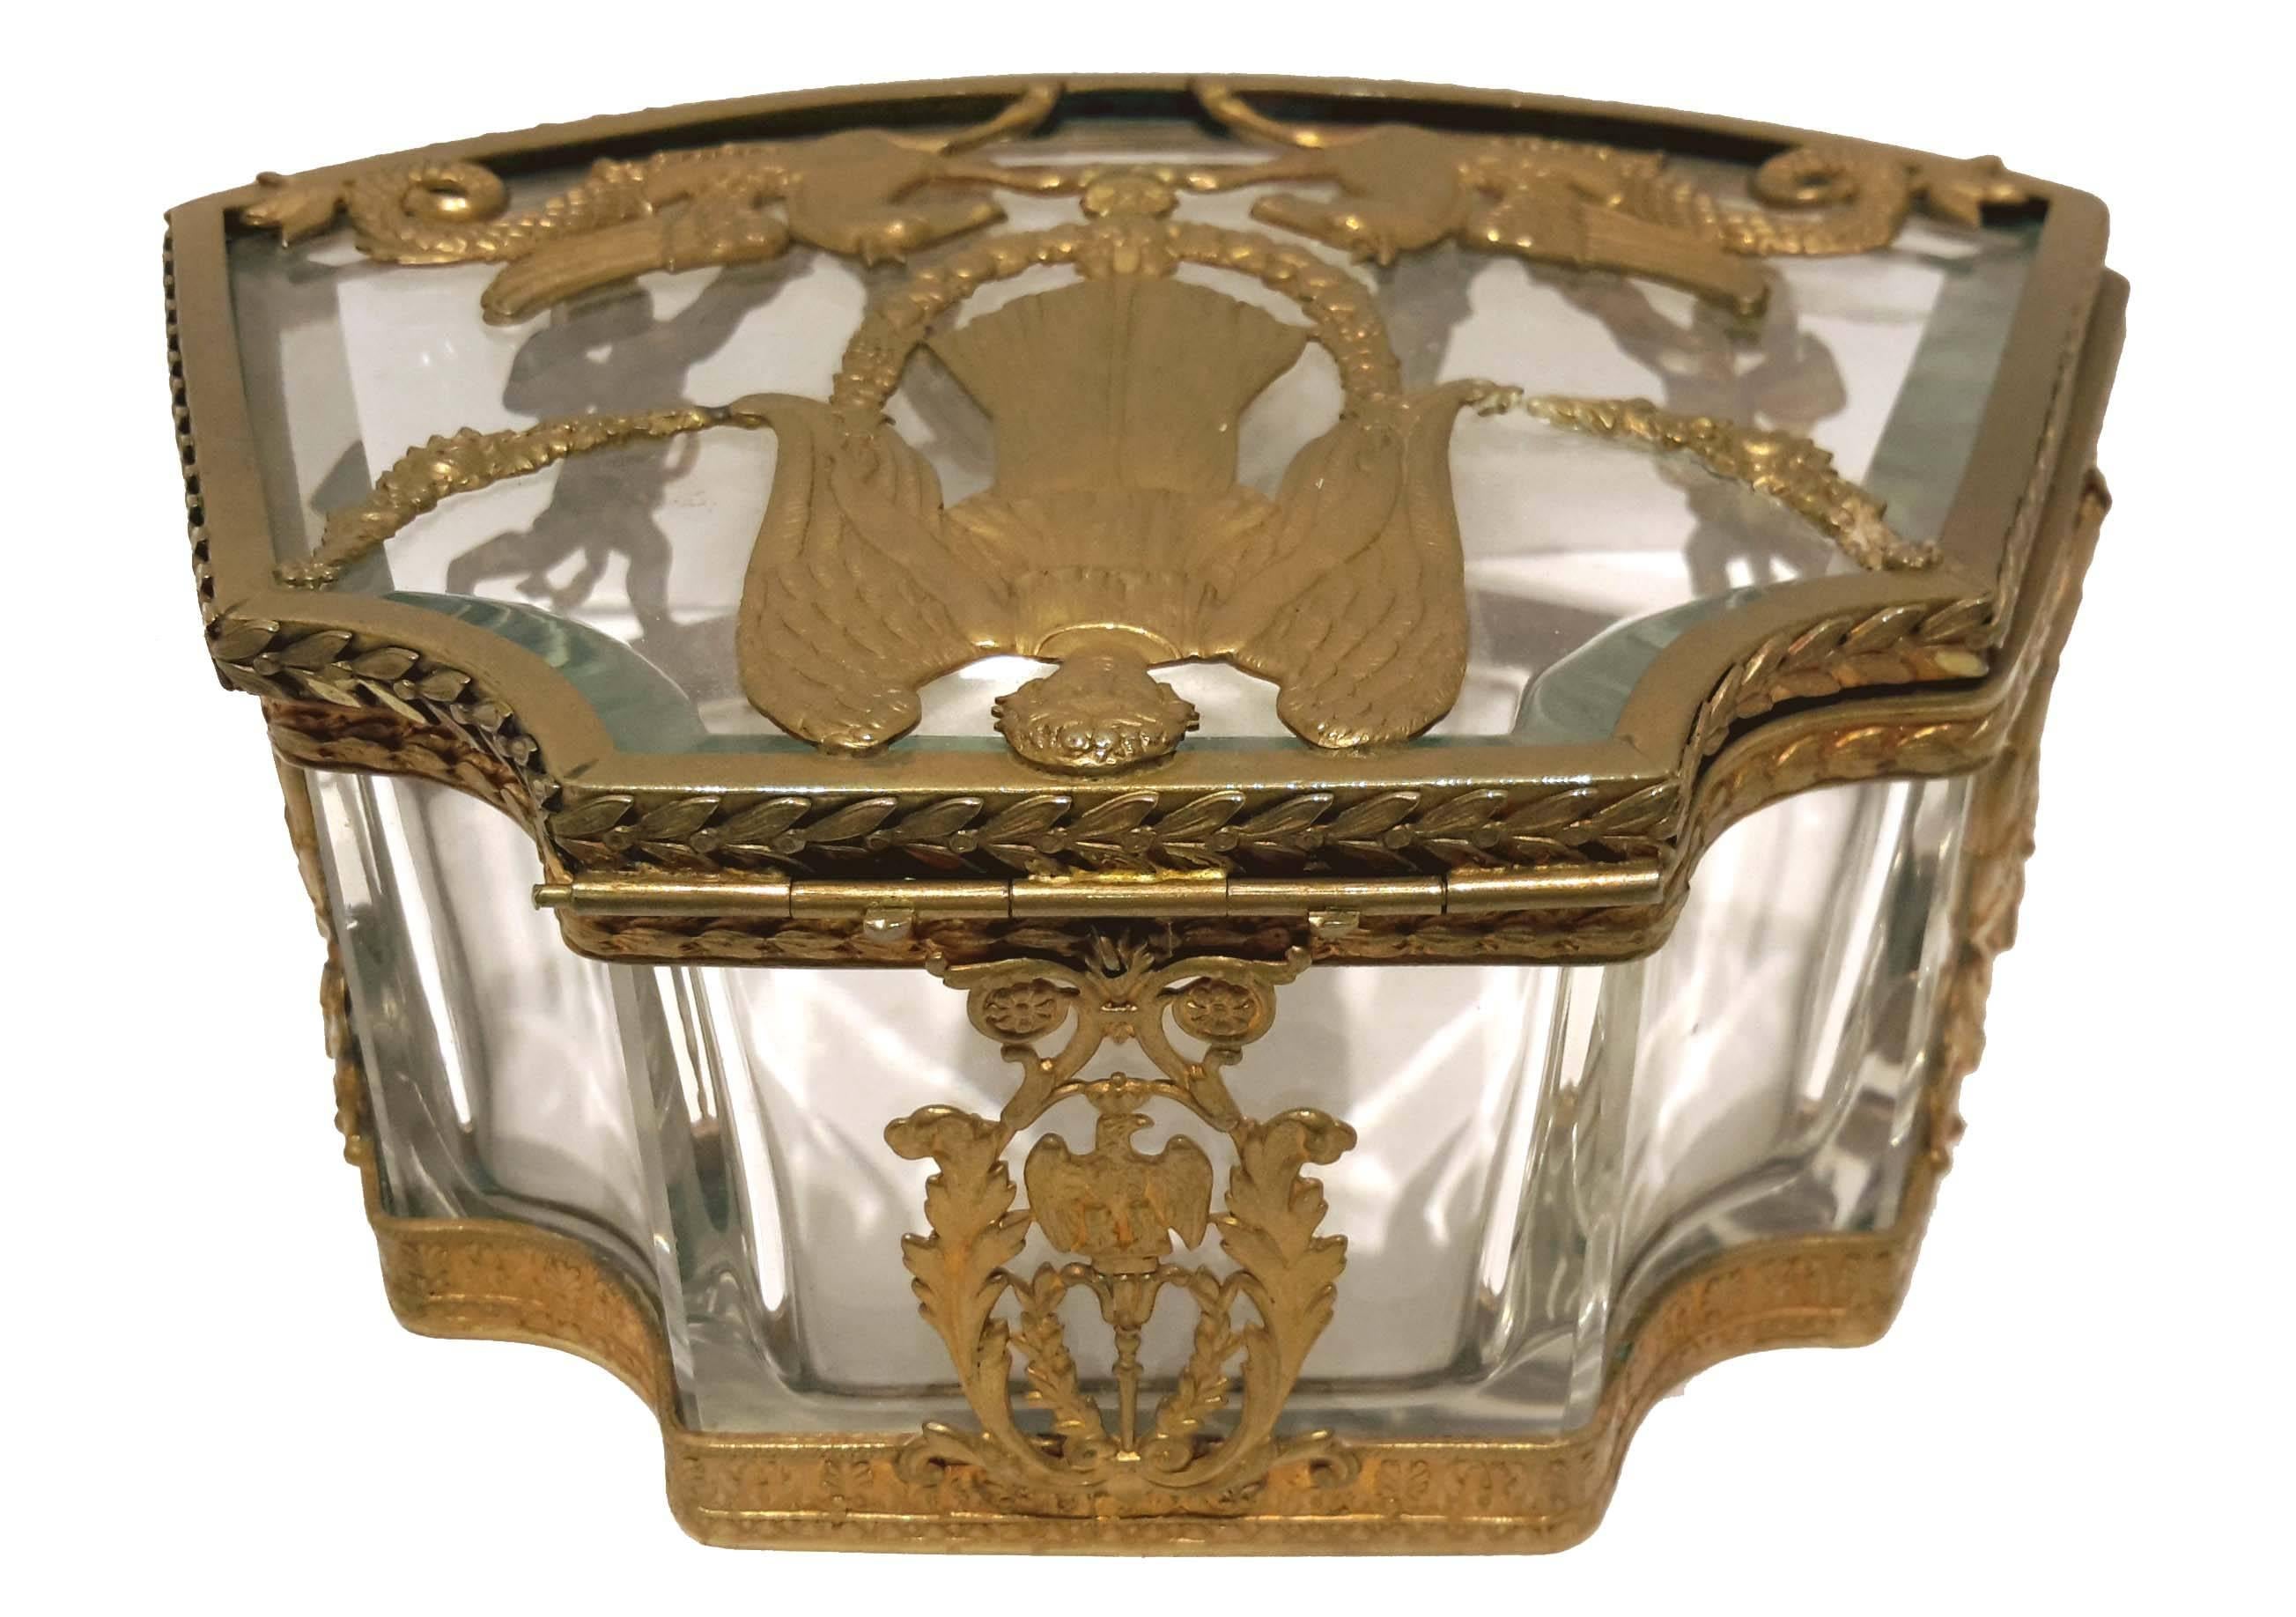 Carved Ormolu-Mounted French Crystal Jewelry Box/ Casket in Empire Style, circa 1900